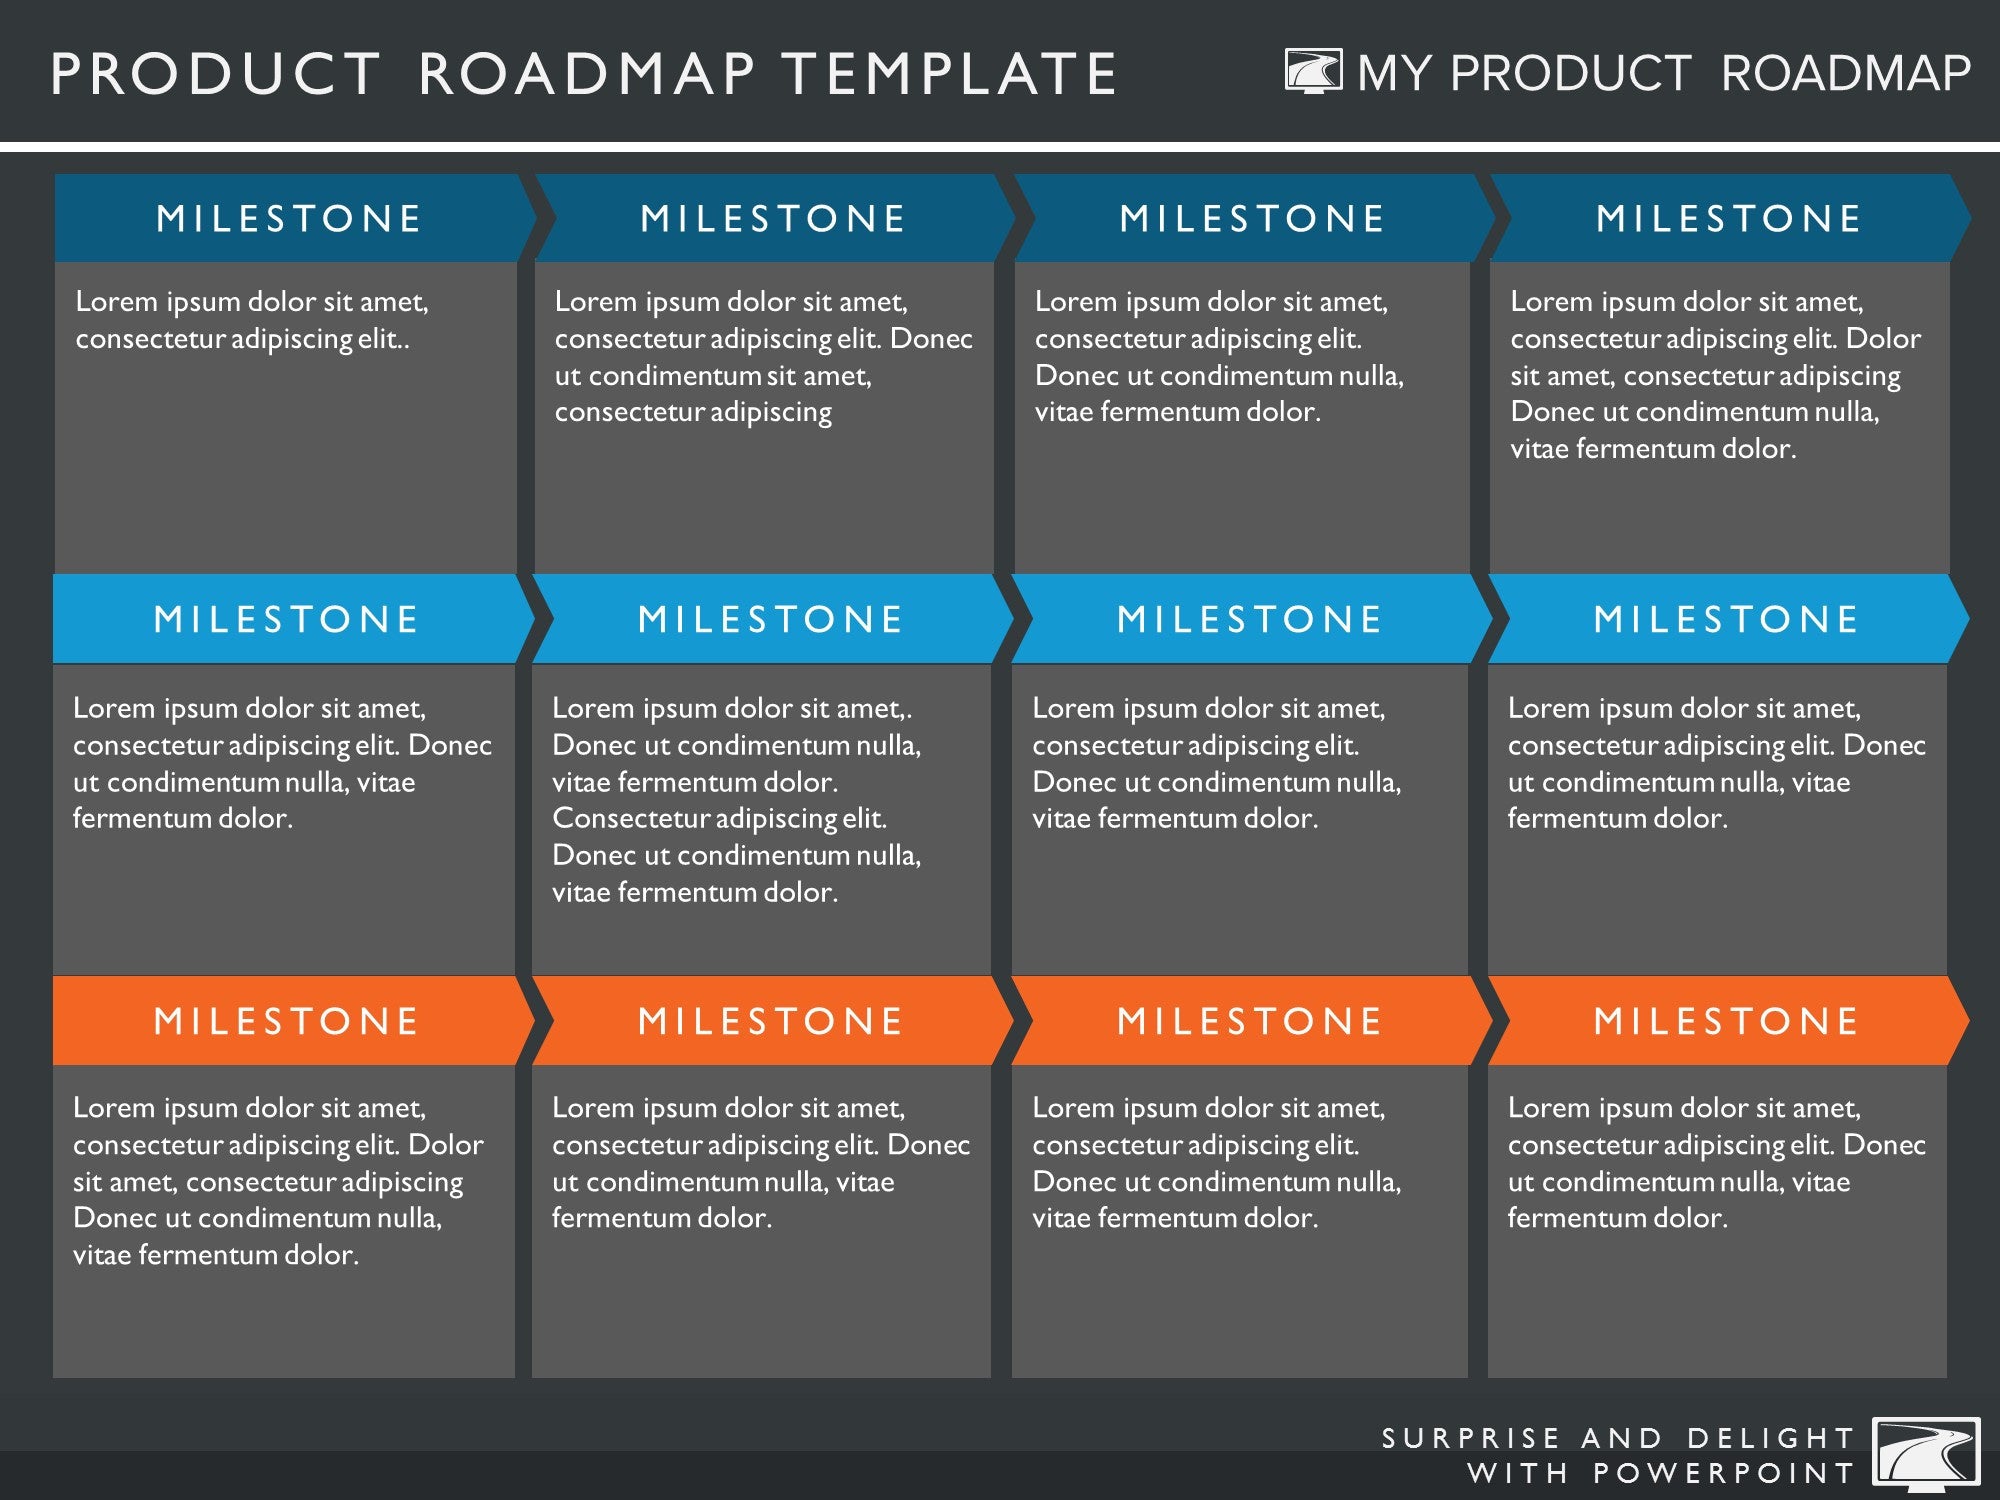 6 Phase Software Roadmap Product Roadmap Templates Andverticalseparator My Product Roadmap 9016